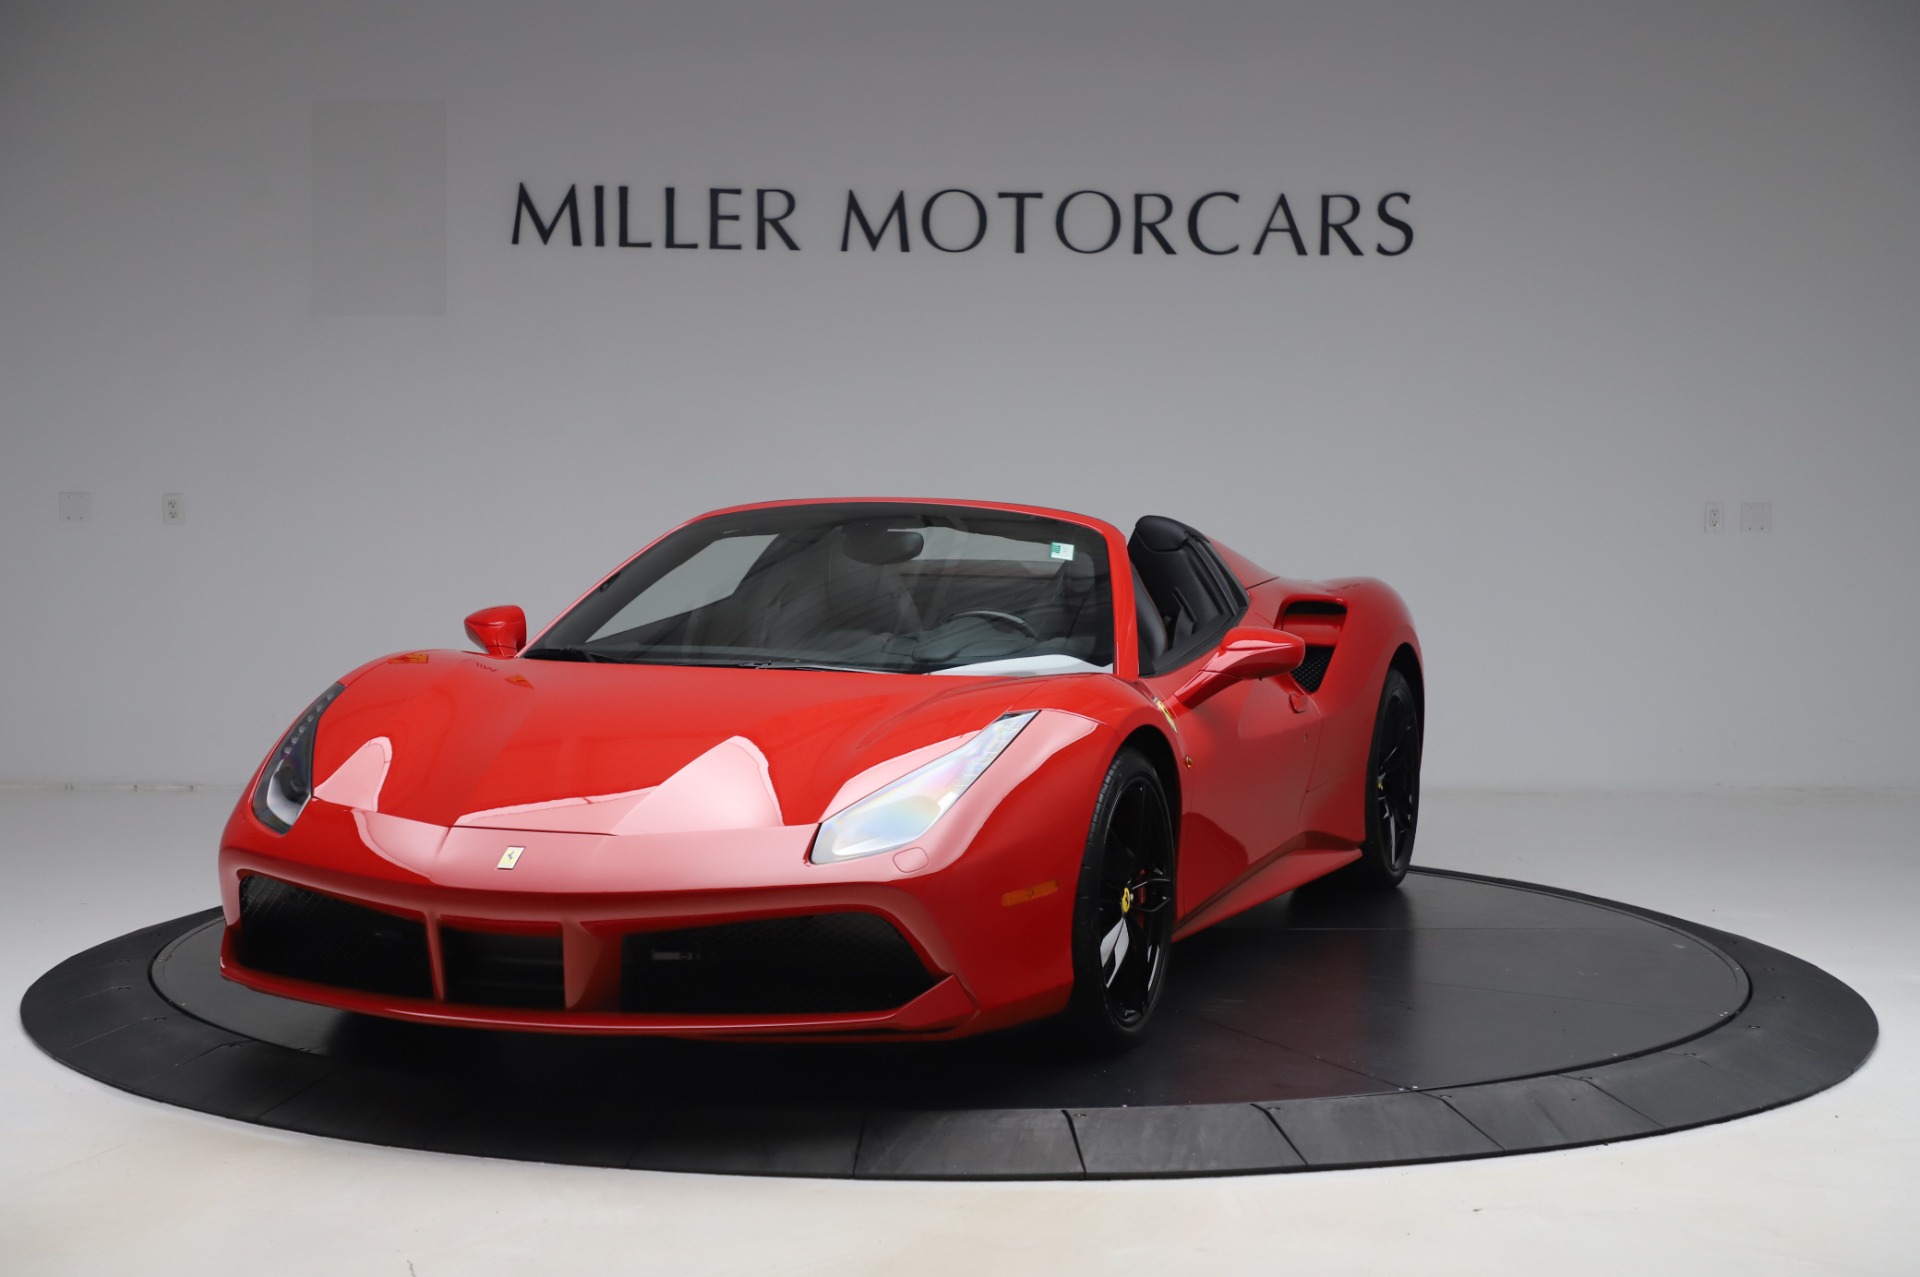 Used 2017 Ferrari 488 Spider for sale Sold at Aston Martin of Greenwich in Greenwich CT 06830 1